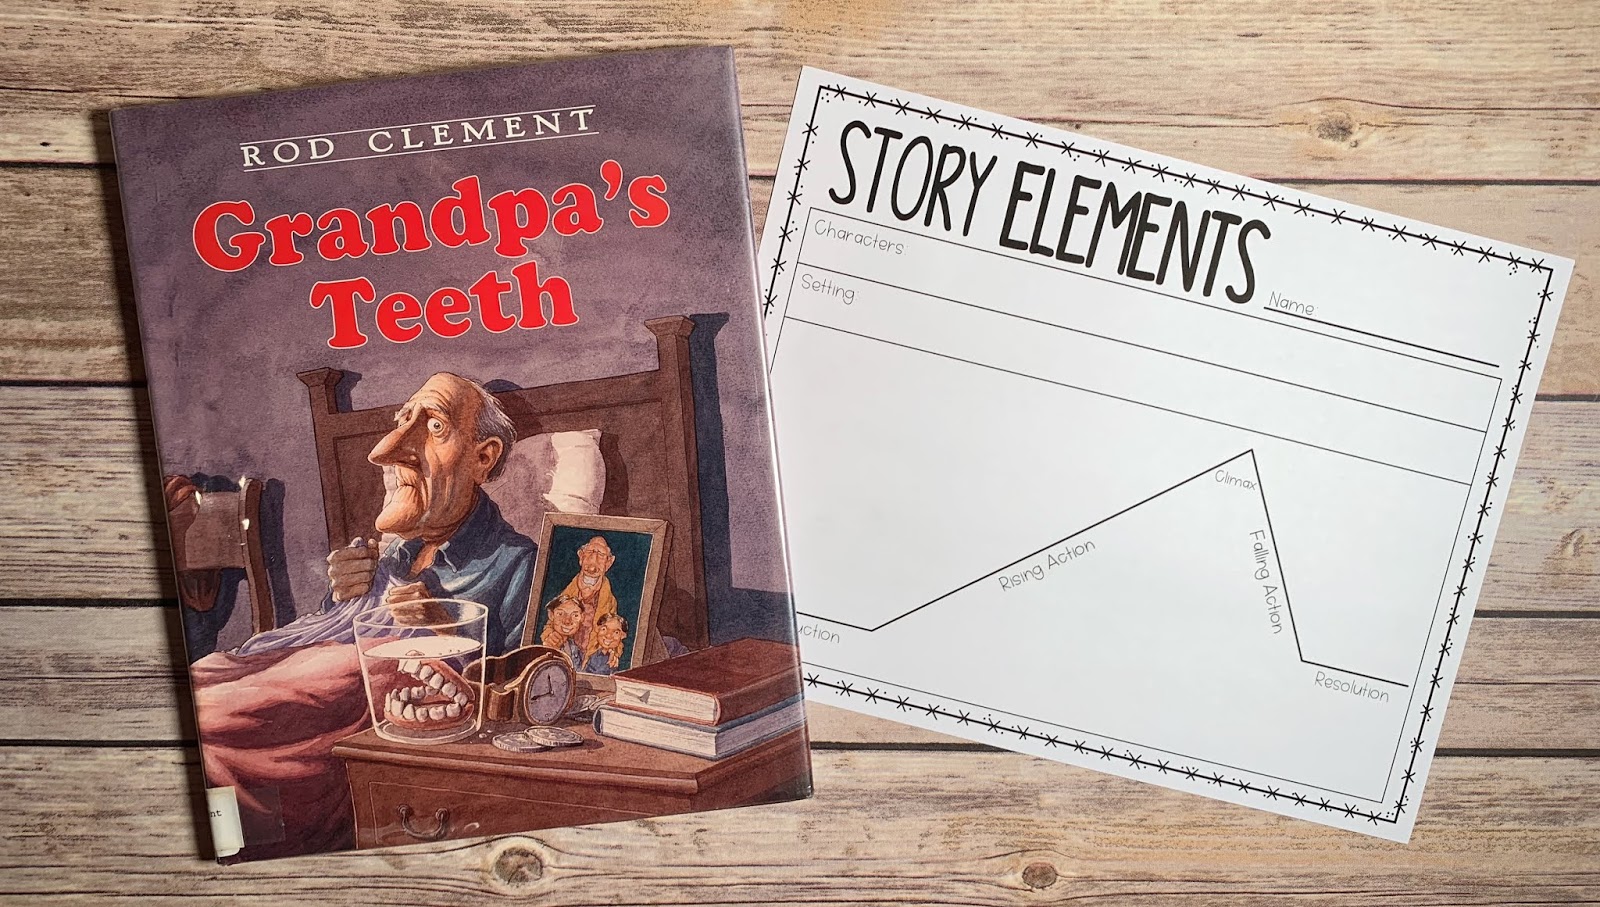 Mentor Text with text "Grandpa's Teeth" and Graphic Organizer with text "Story Elements"